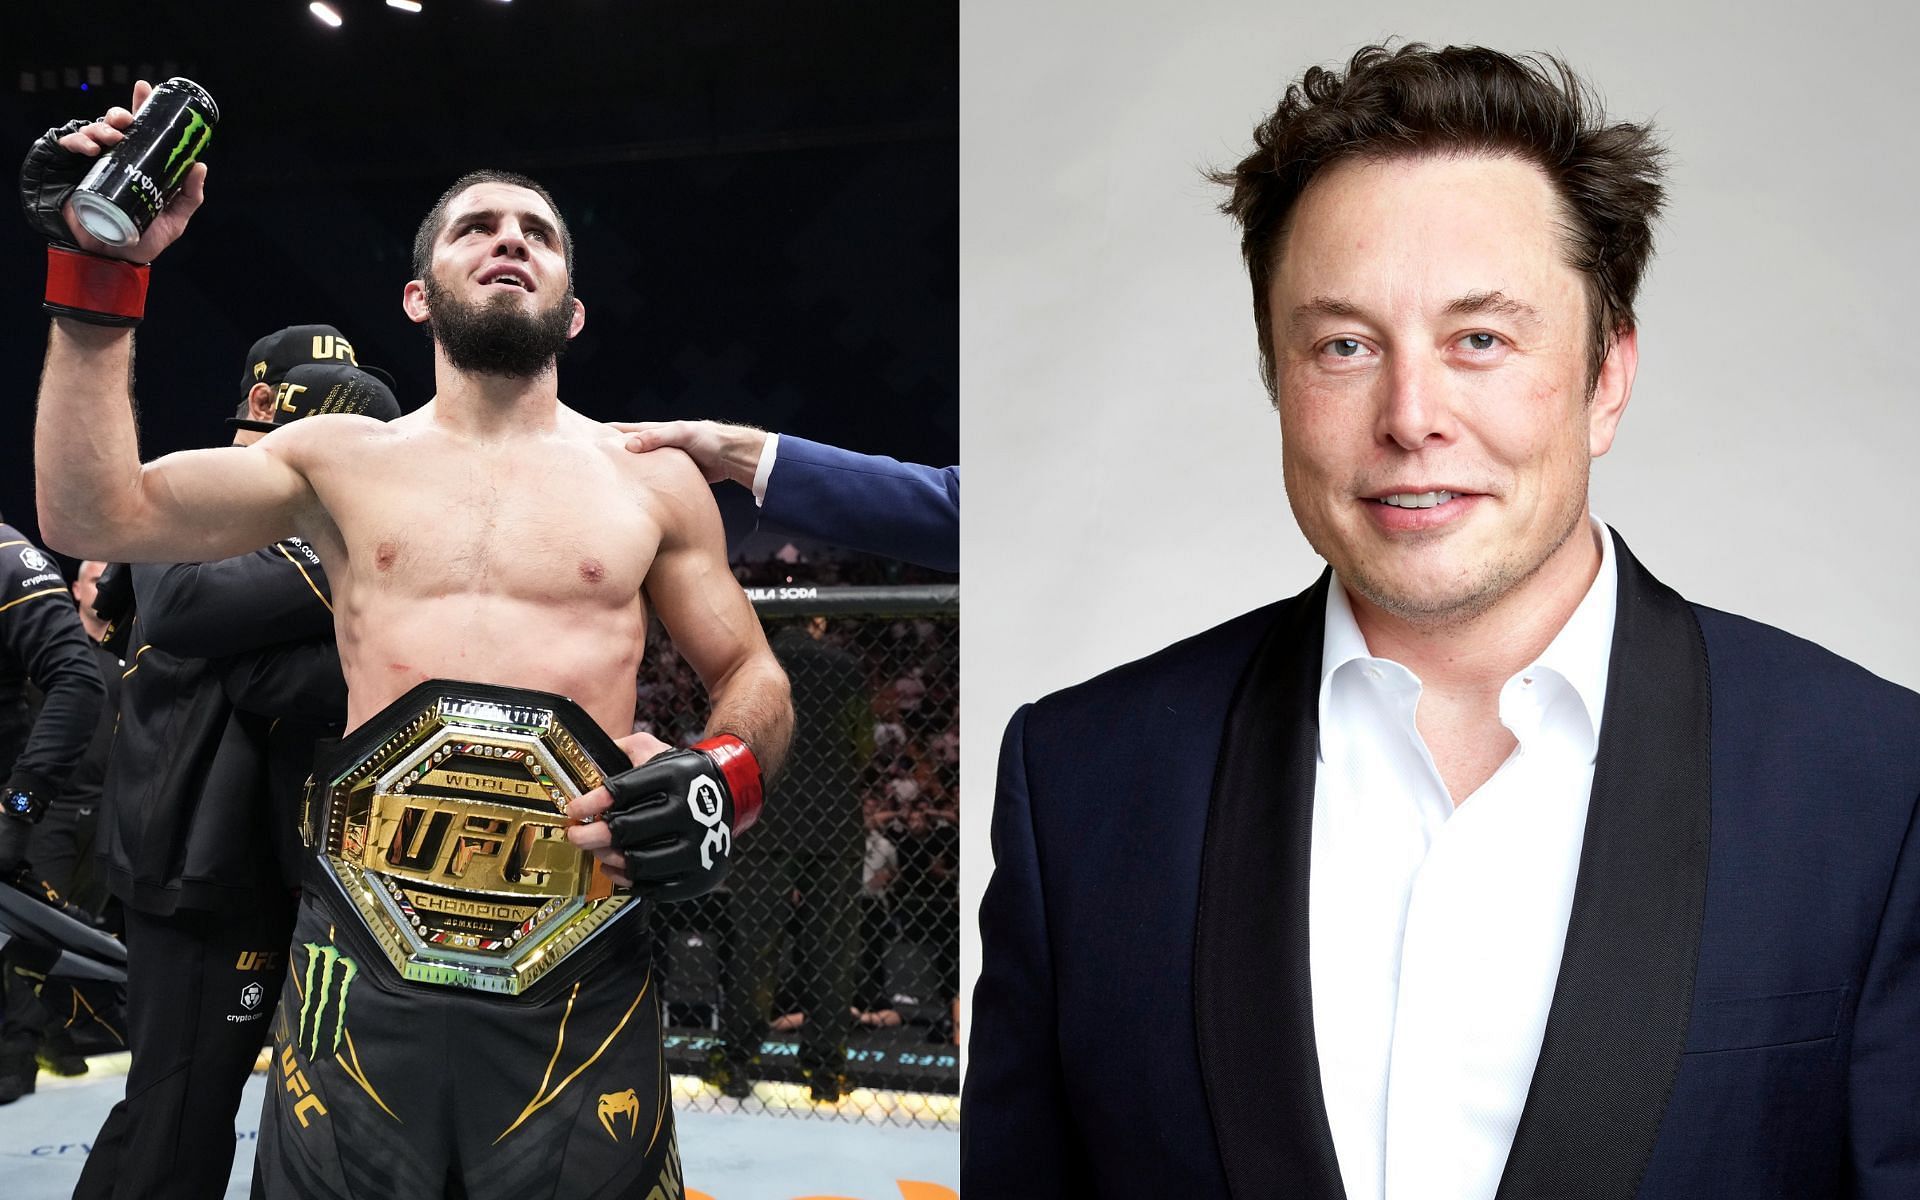 Islam Makhachev [Left] Elon Musk [Right] [Images courtesy: @ufc (Twitter) and Wikipedia]